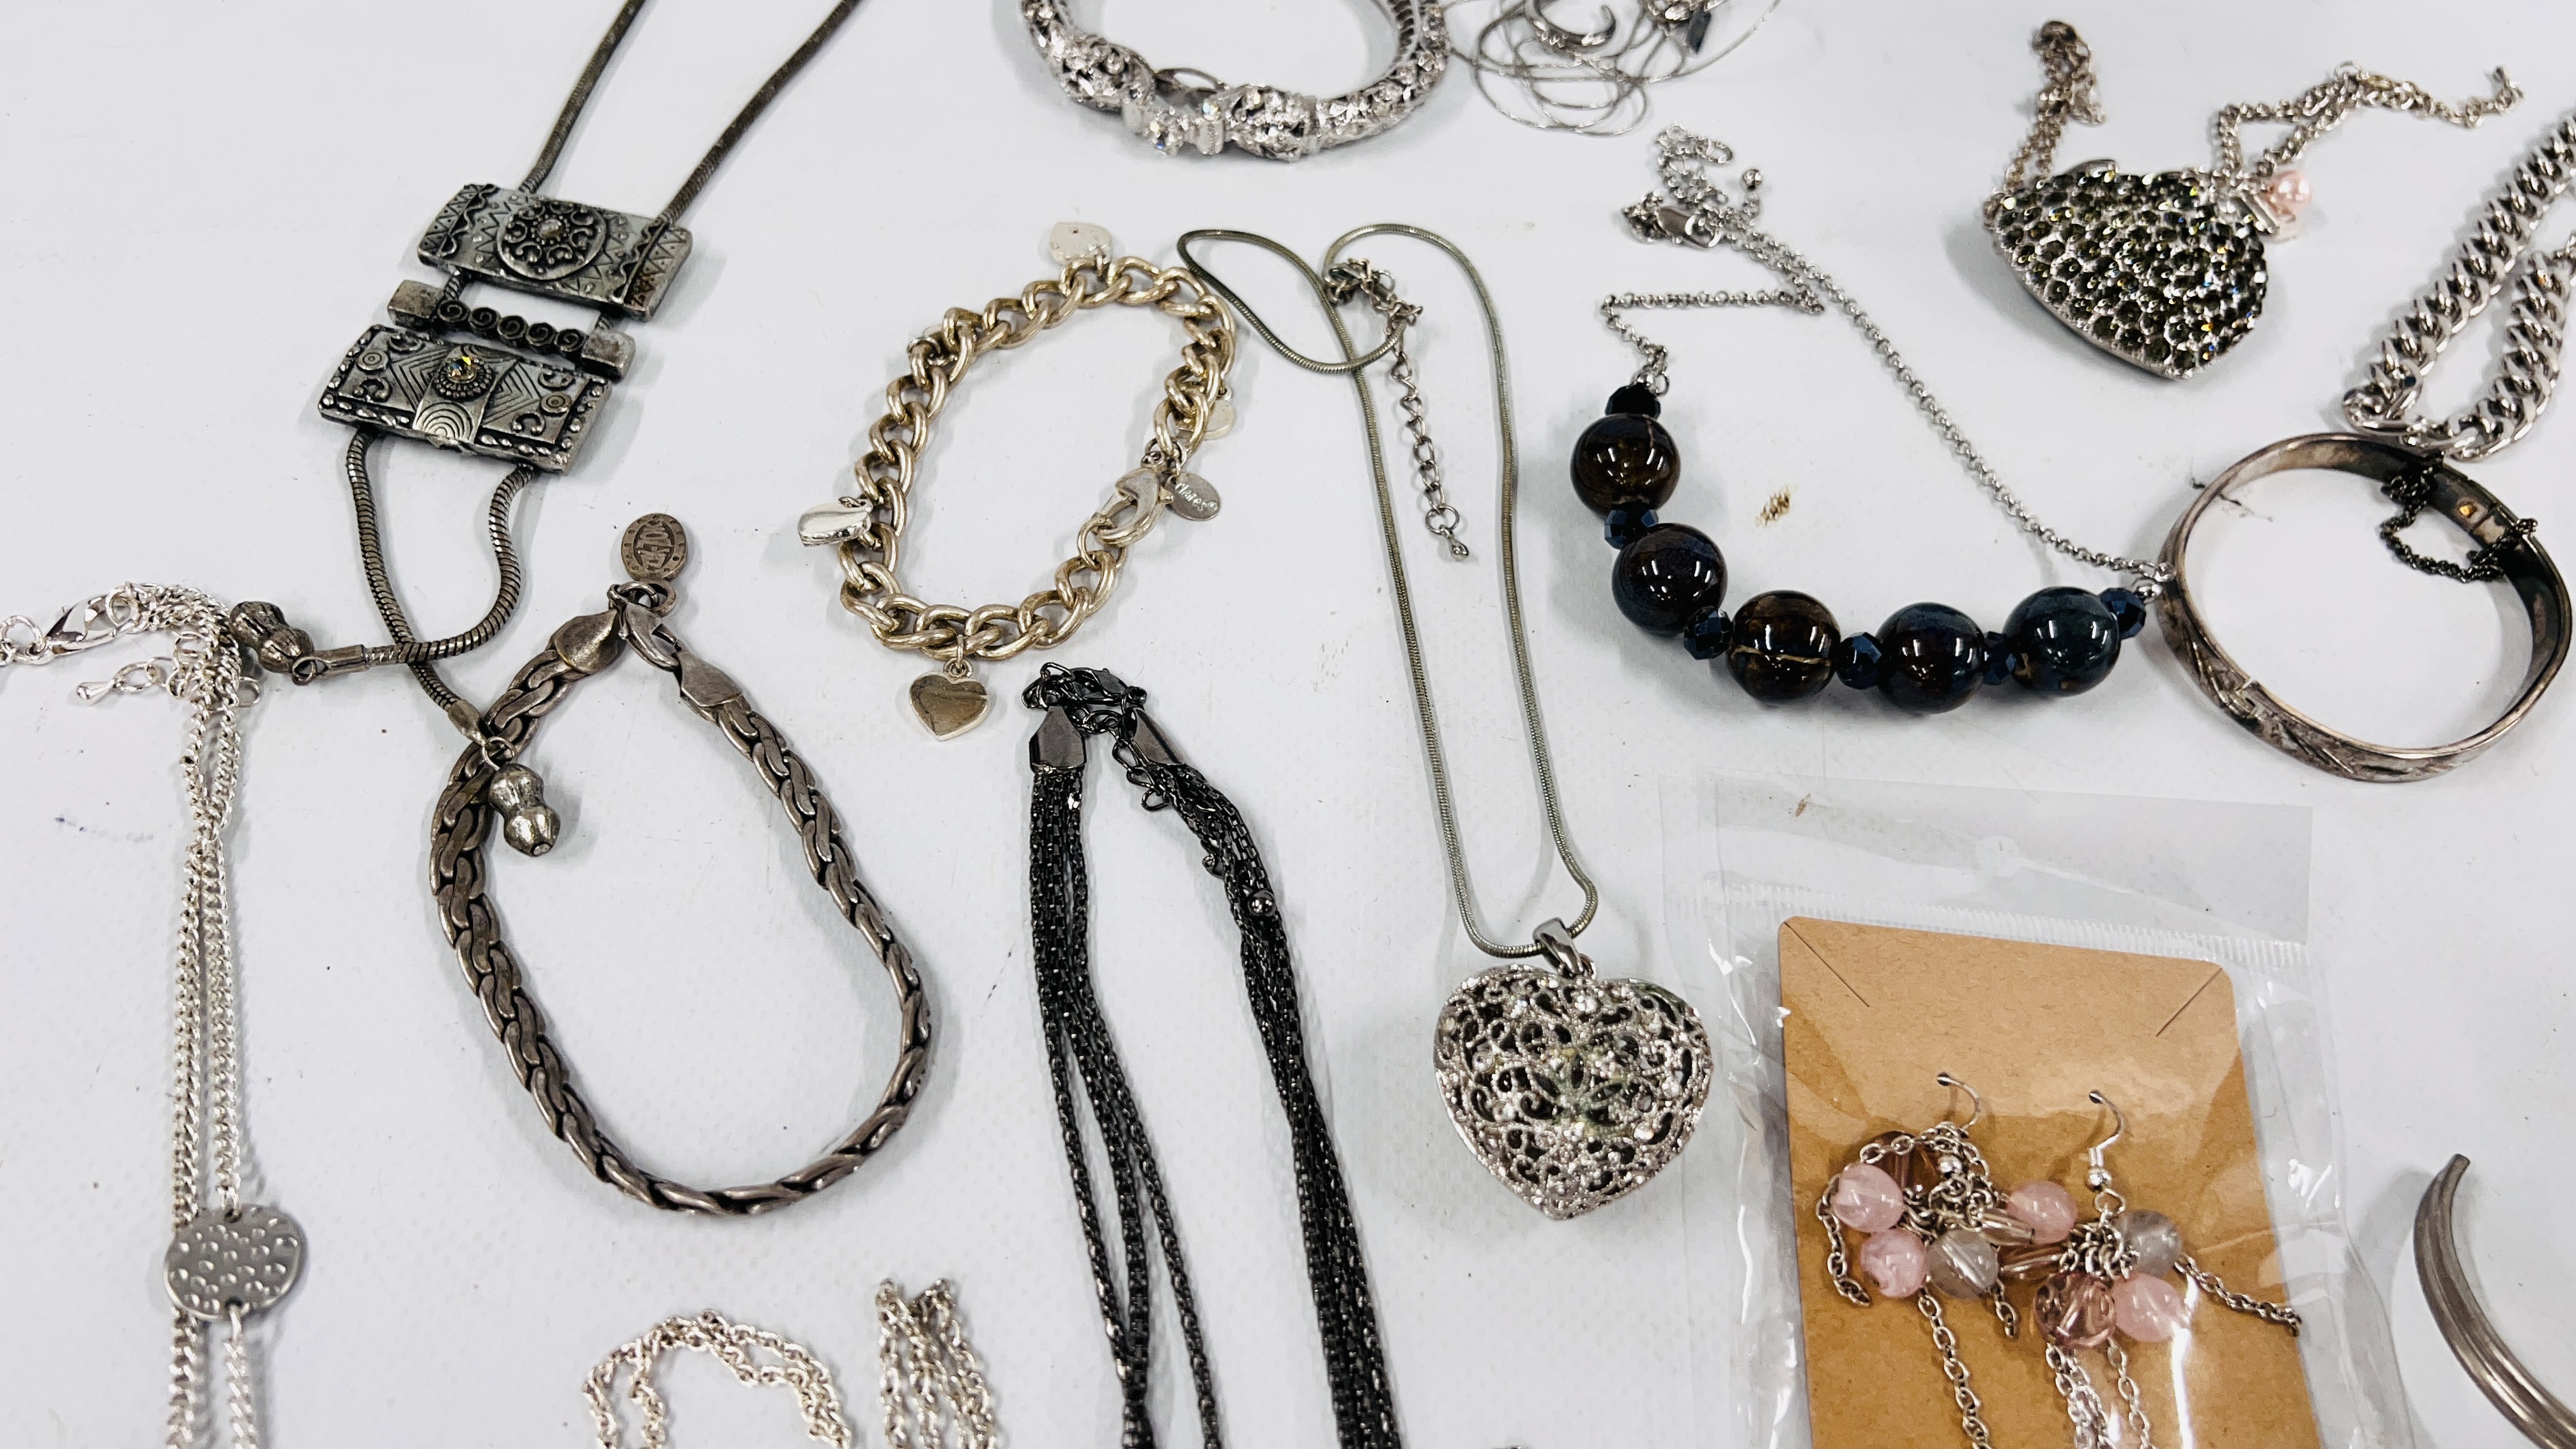 SELECTION OF SILVERTONE COSTUME JEWELLERY ALONG WITH A JEWELLERY BOX FULL OF BEADED NECKLACES. - Image 10 of 12